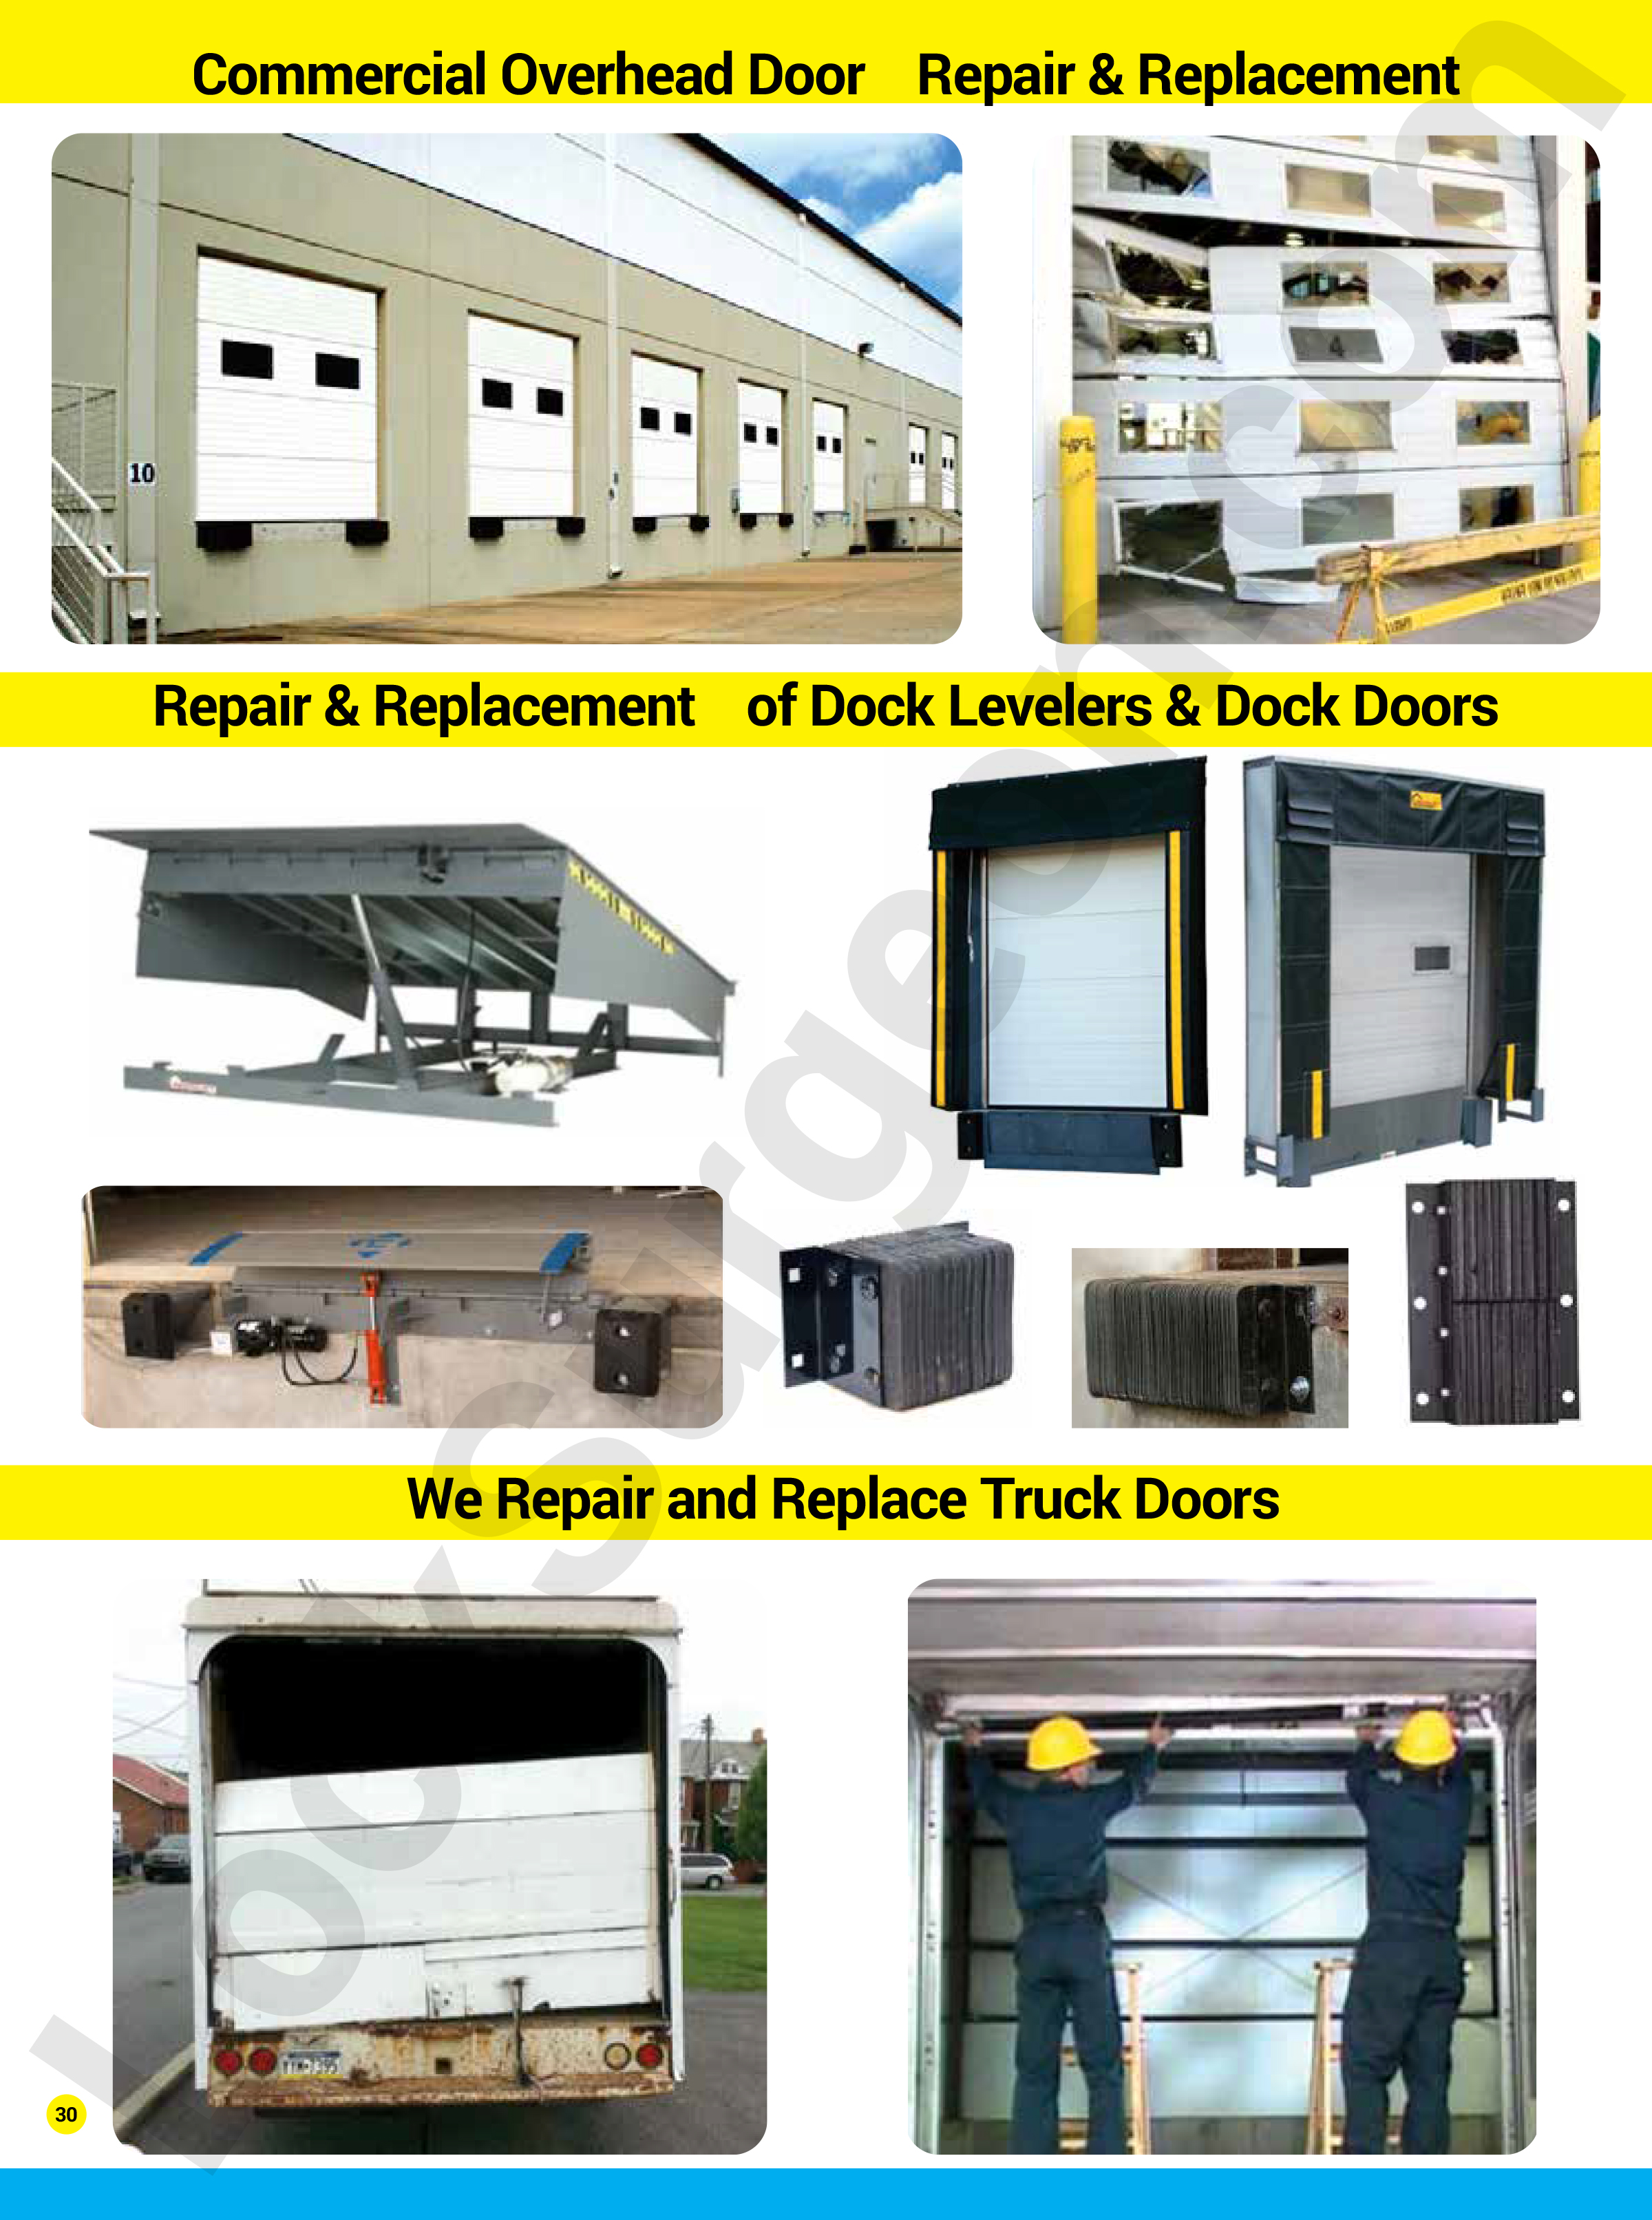 Lock Surgeon professional locksmiths provide mobile repair replacement of commercial overhead doors.